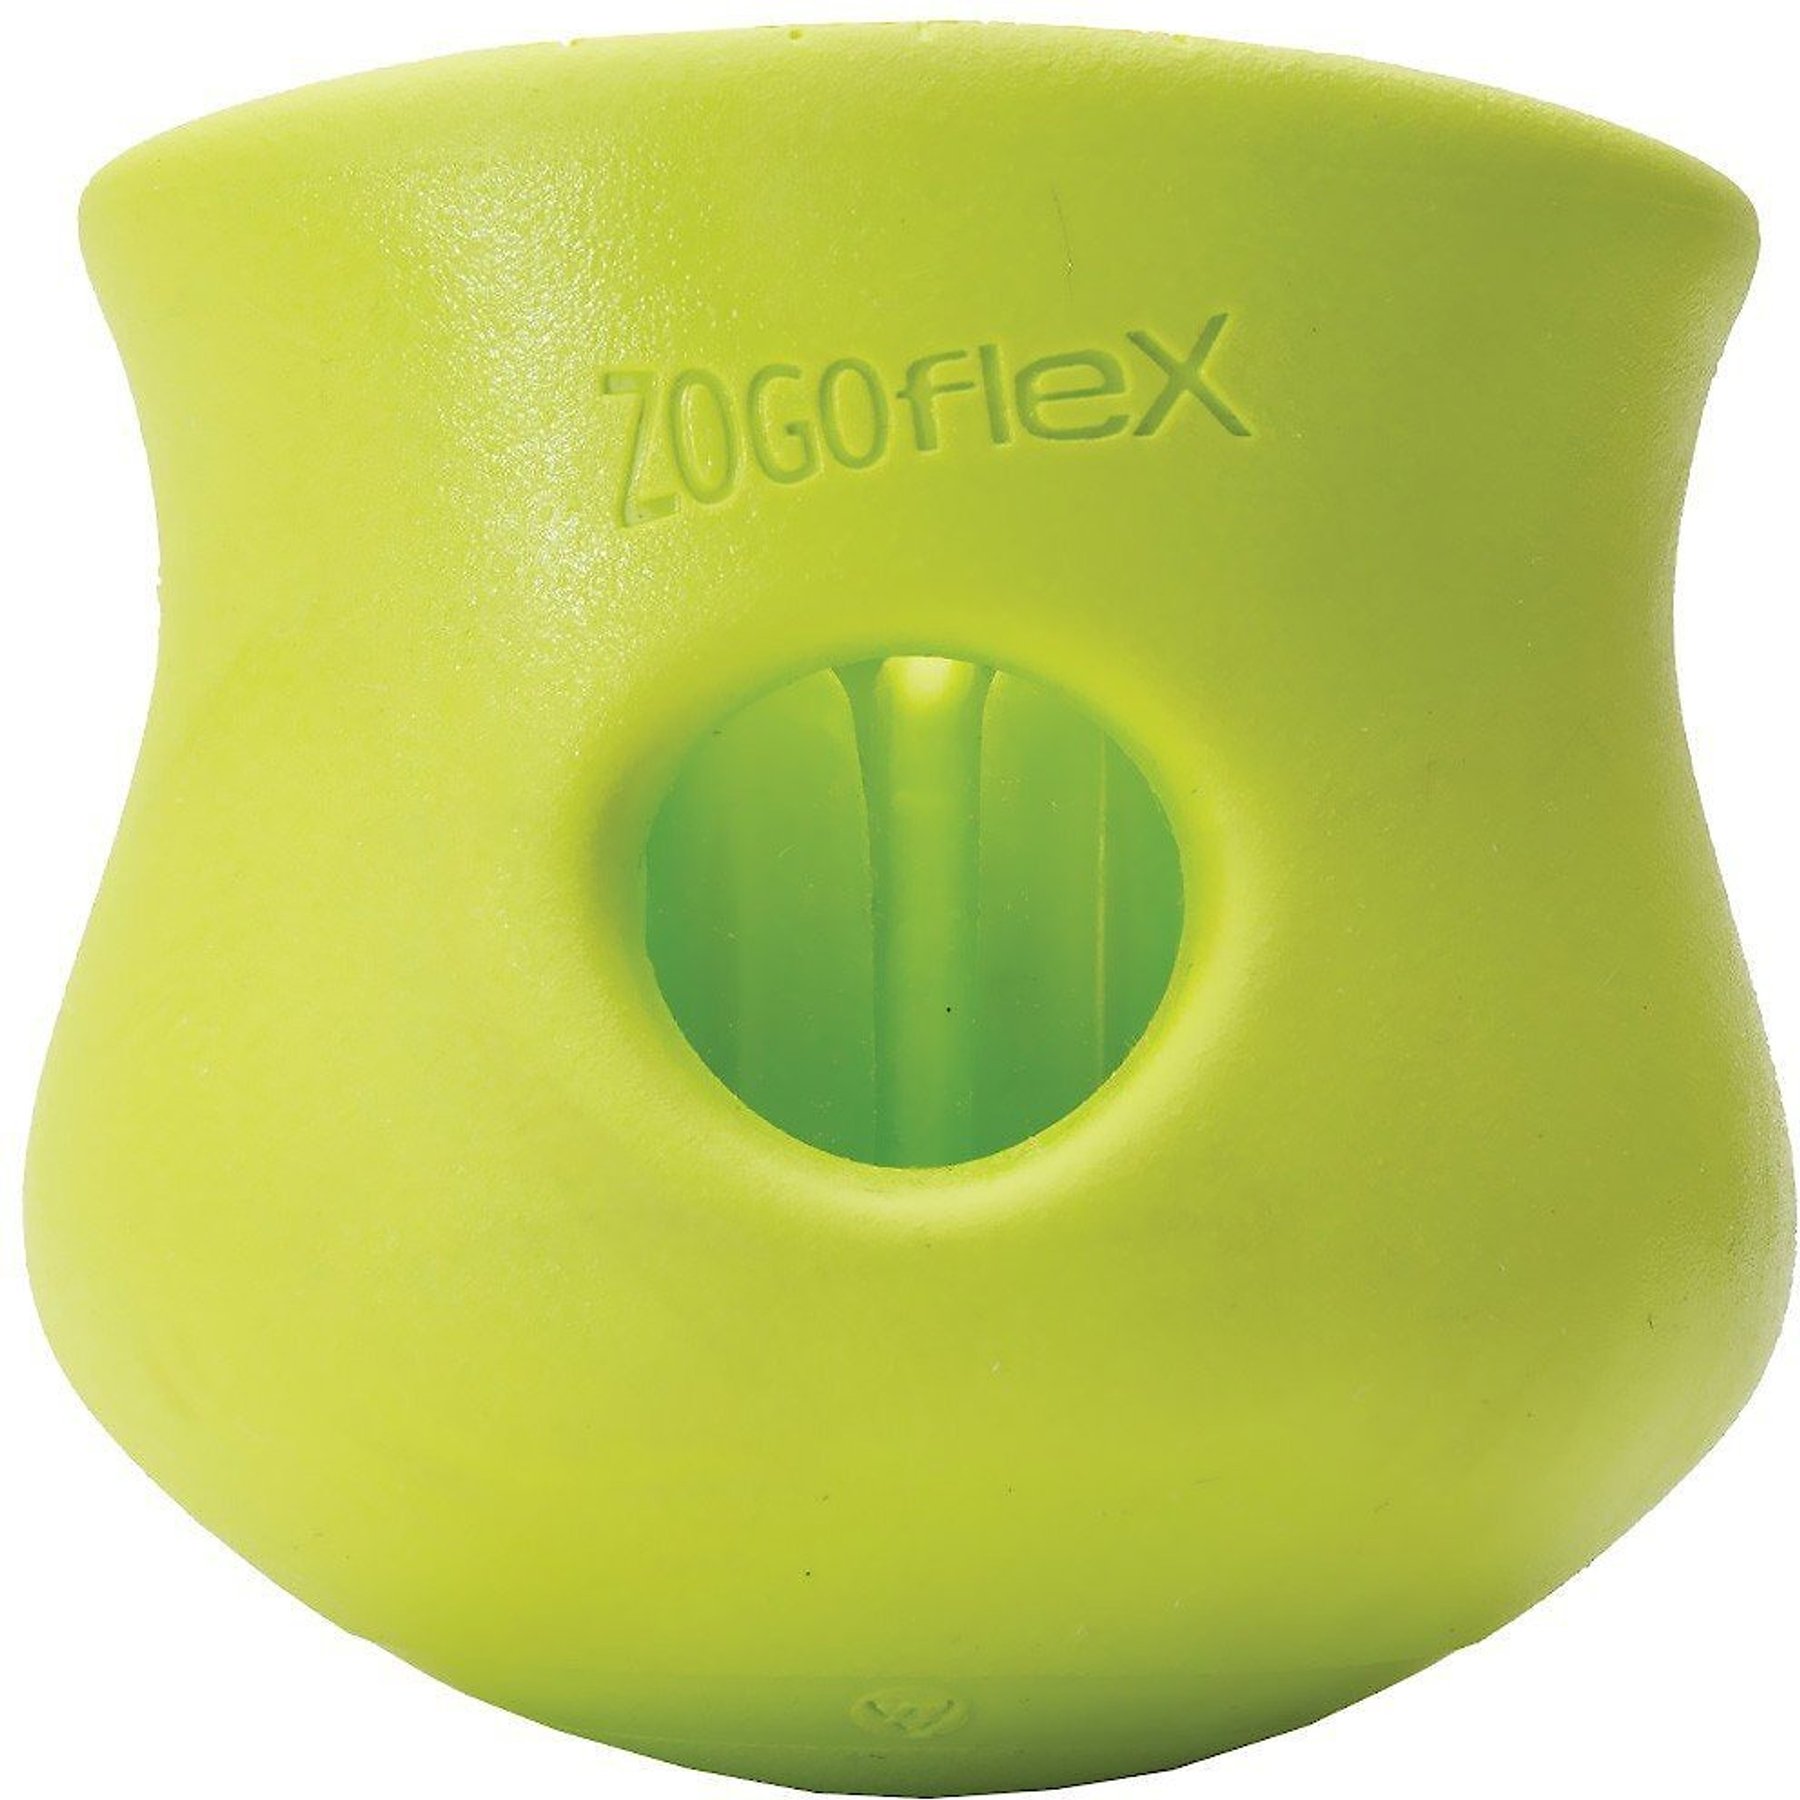 West Paw Zogoflex Toppl Interactive Treat Dispensing Dog Puzzle Play Toy,  100% Guaranteed Tough, It Floats!, Made in USA, Large, Granny Smith